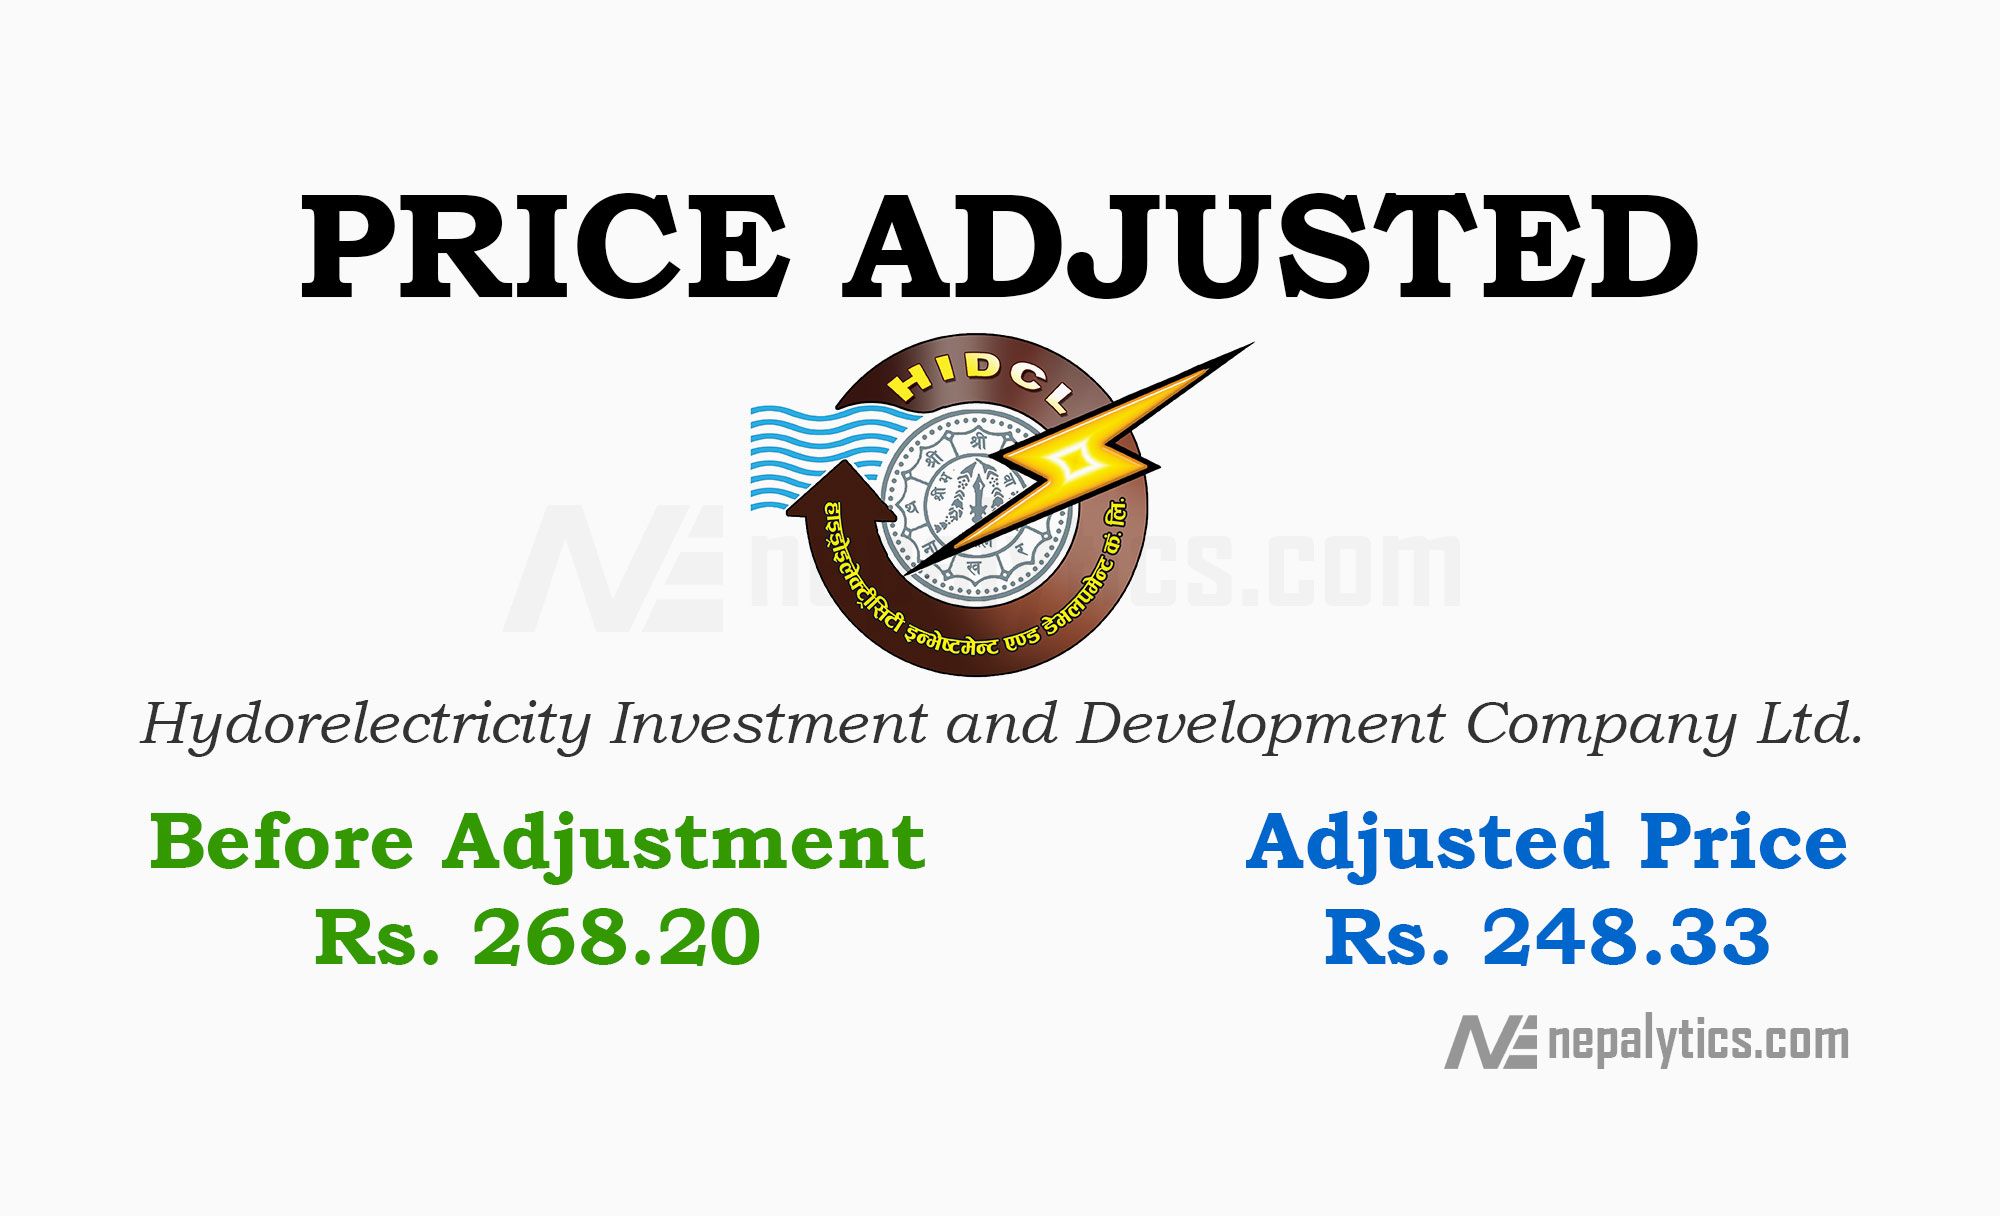 Price Adjustment for 8% of Bonus Share of Hydorelectricity Investment and Development Company Ltd.